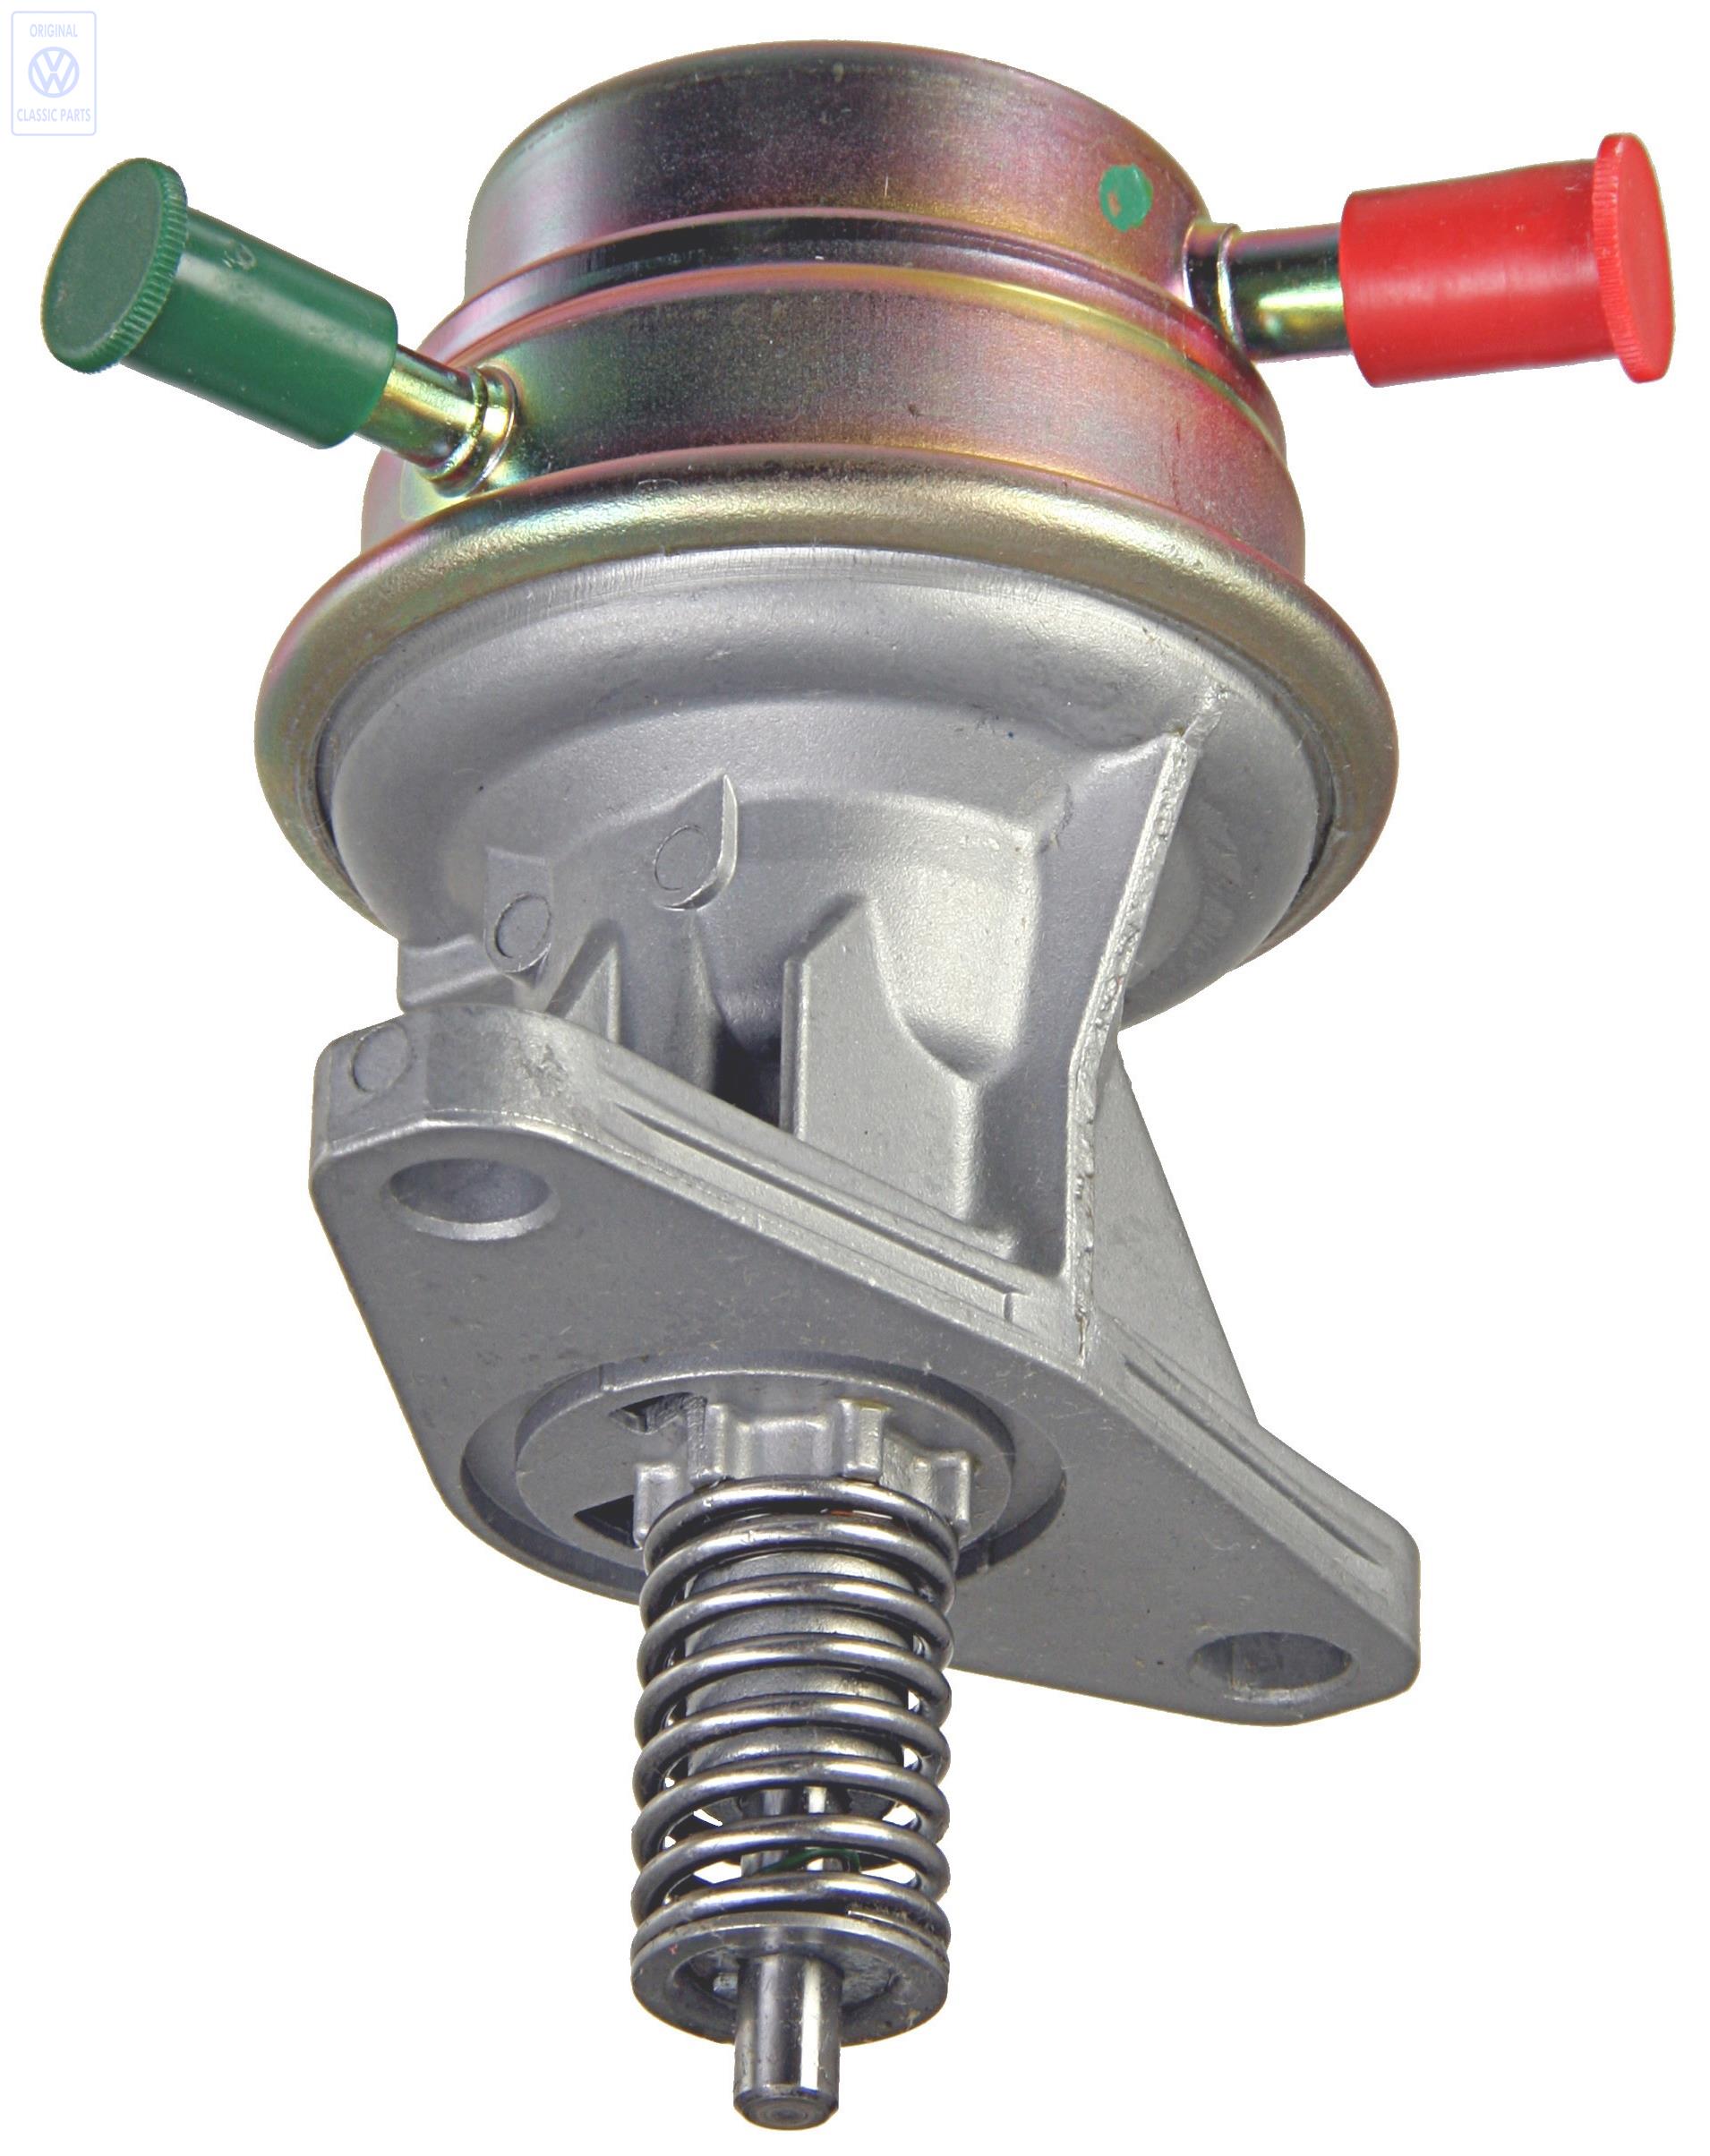 Fuel pump for engines with tappets